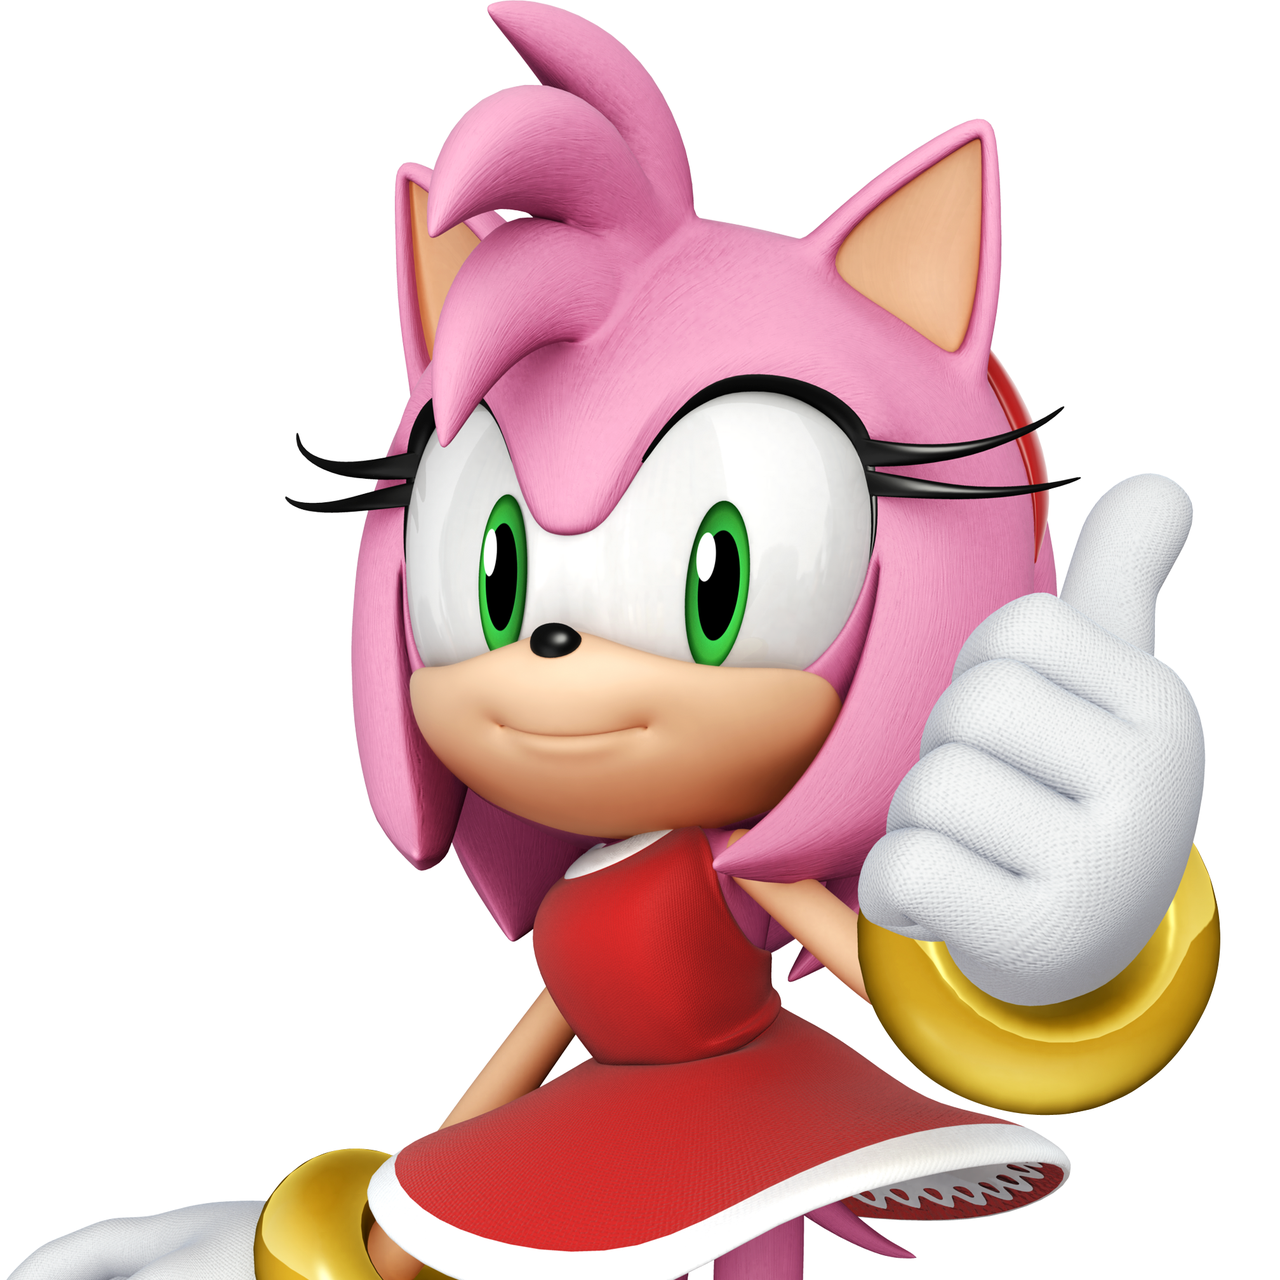 courtney douglass recommends show me pictures of amy rose pic